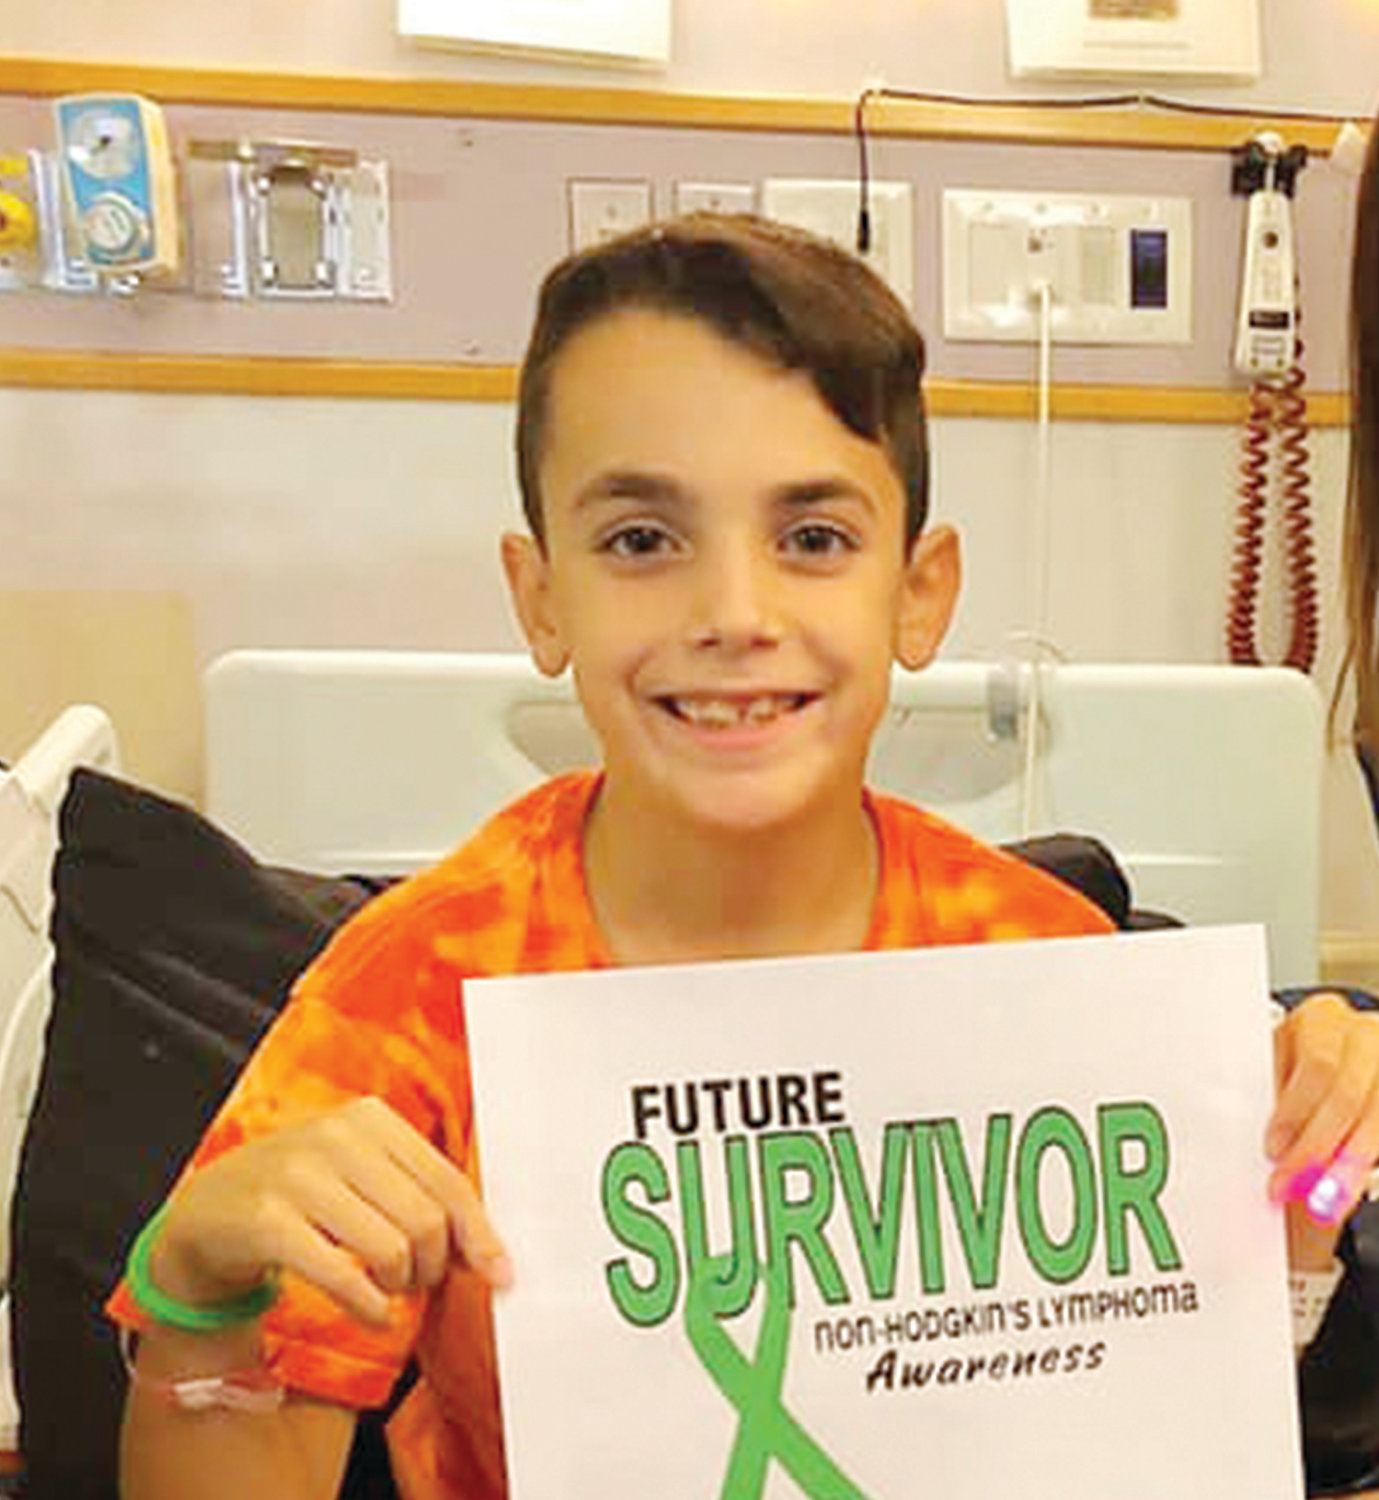 A prayer service was held last week for Noah Antunes, 10, parishioner of St. Michael Church, Smithfield, who is battling Burkitt Lymphoma. The community has come together to show their loving support for Noah.